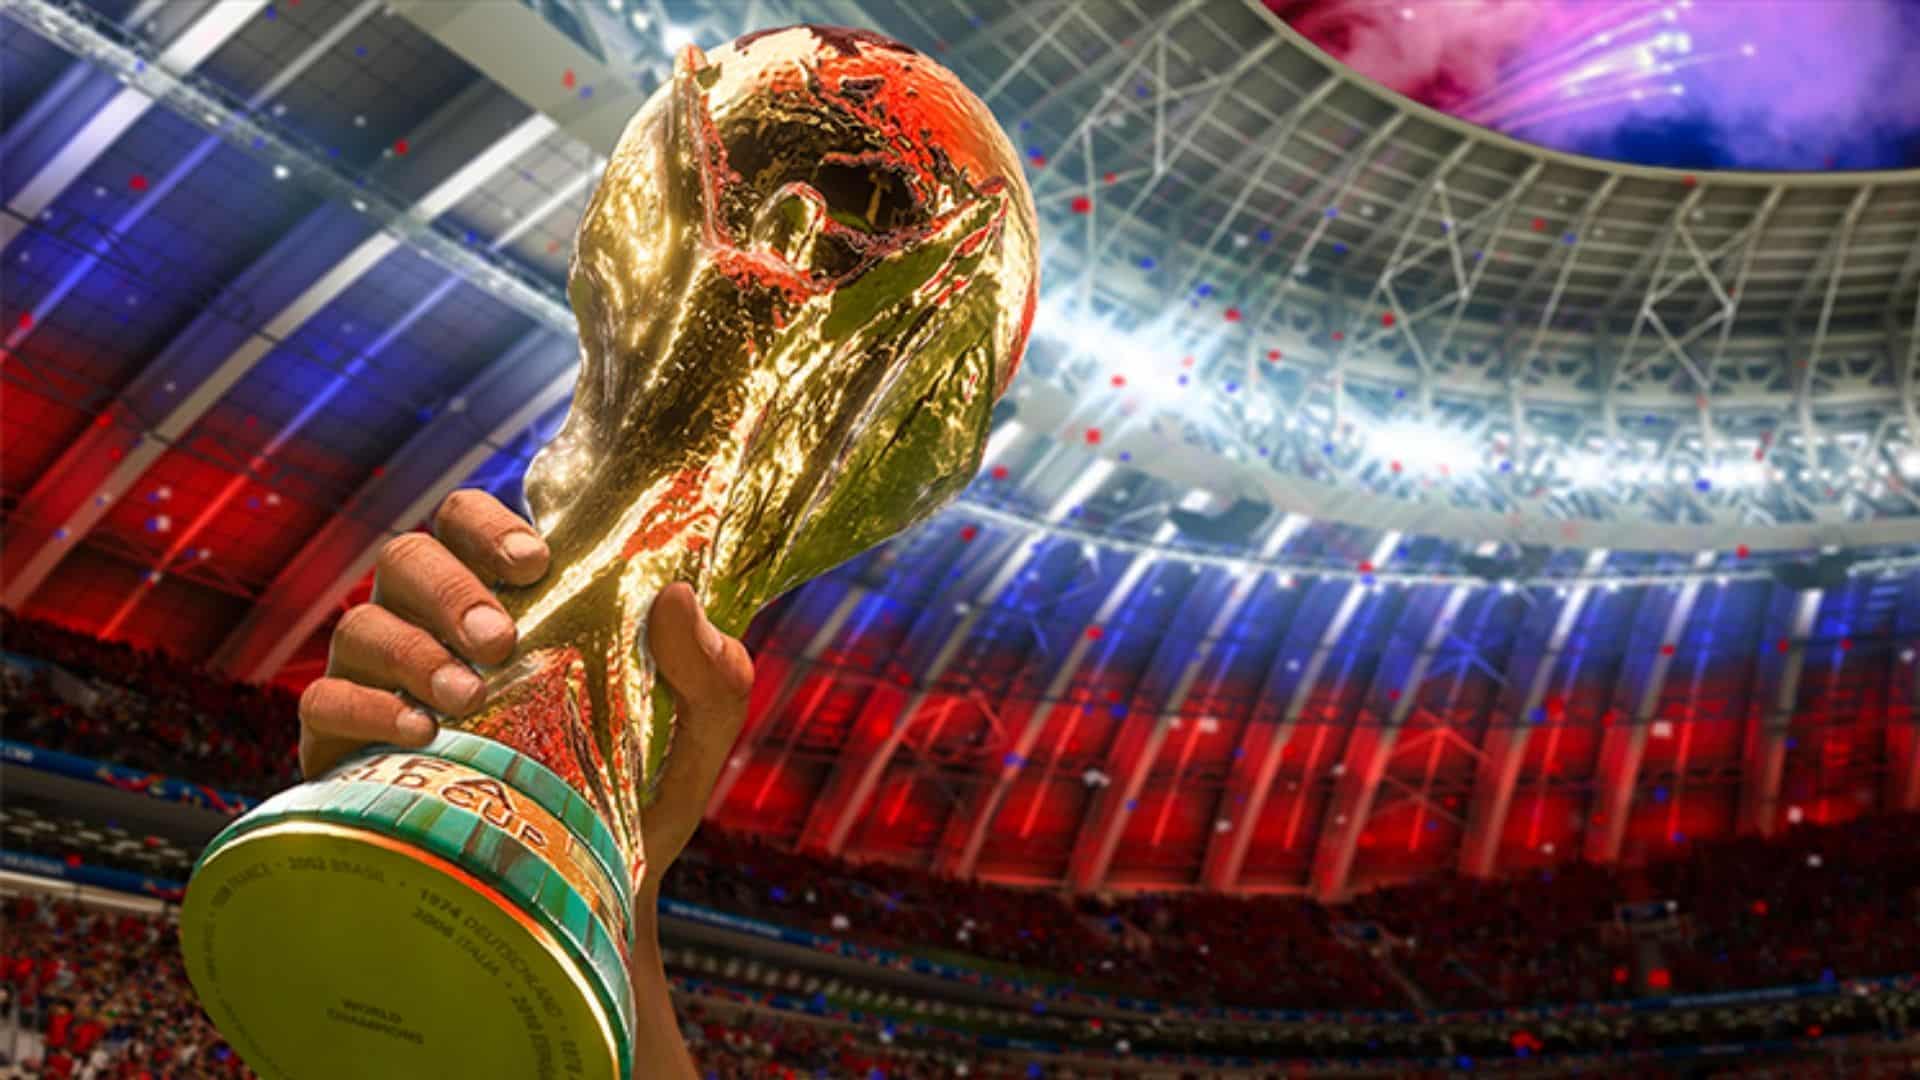 FIFA World Cup trophy being held aloft in FIFA